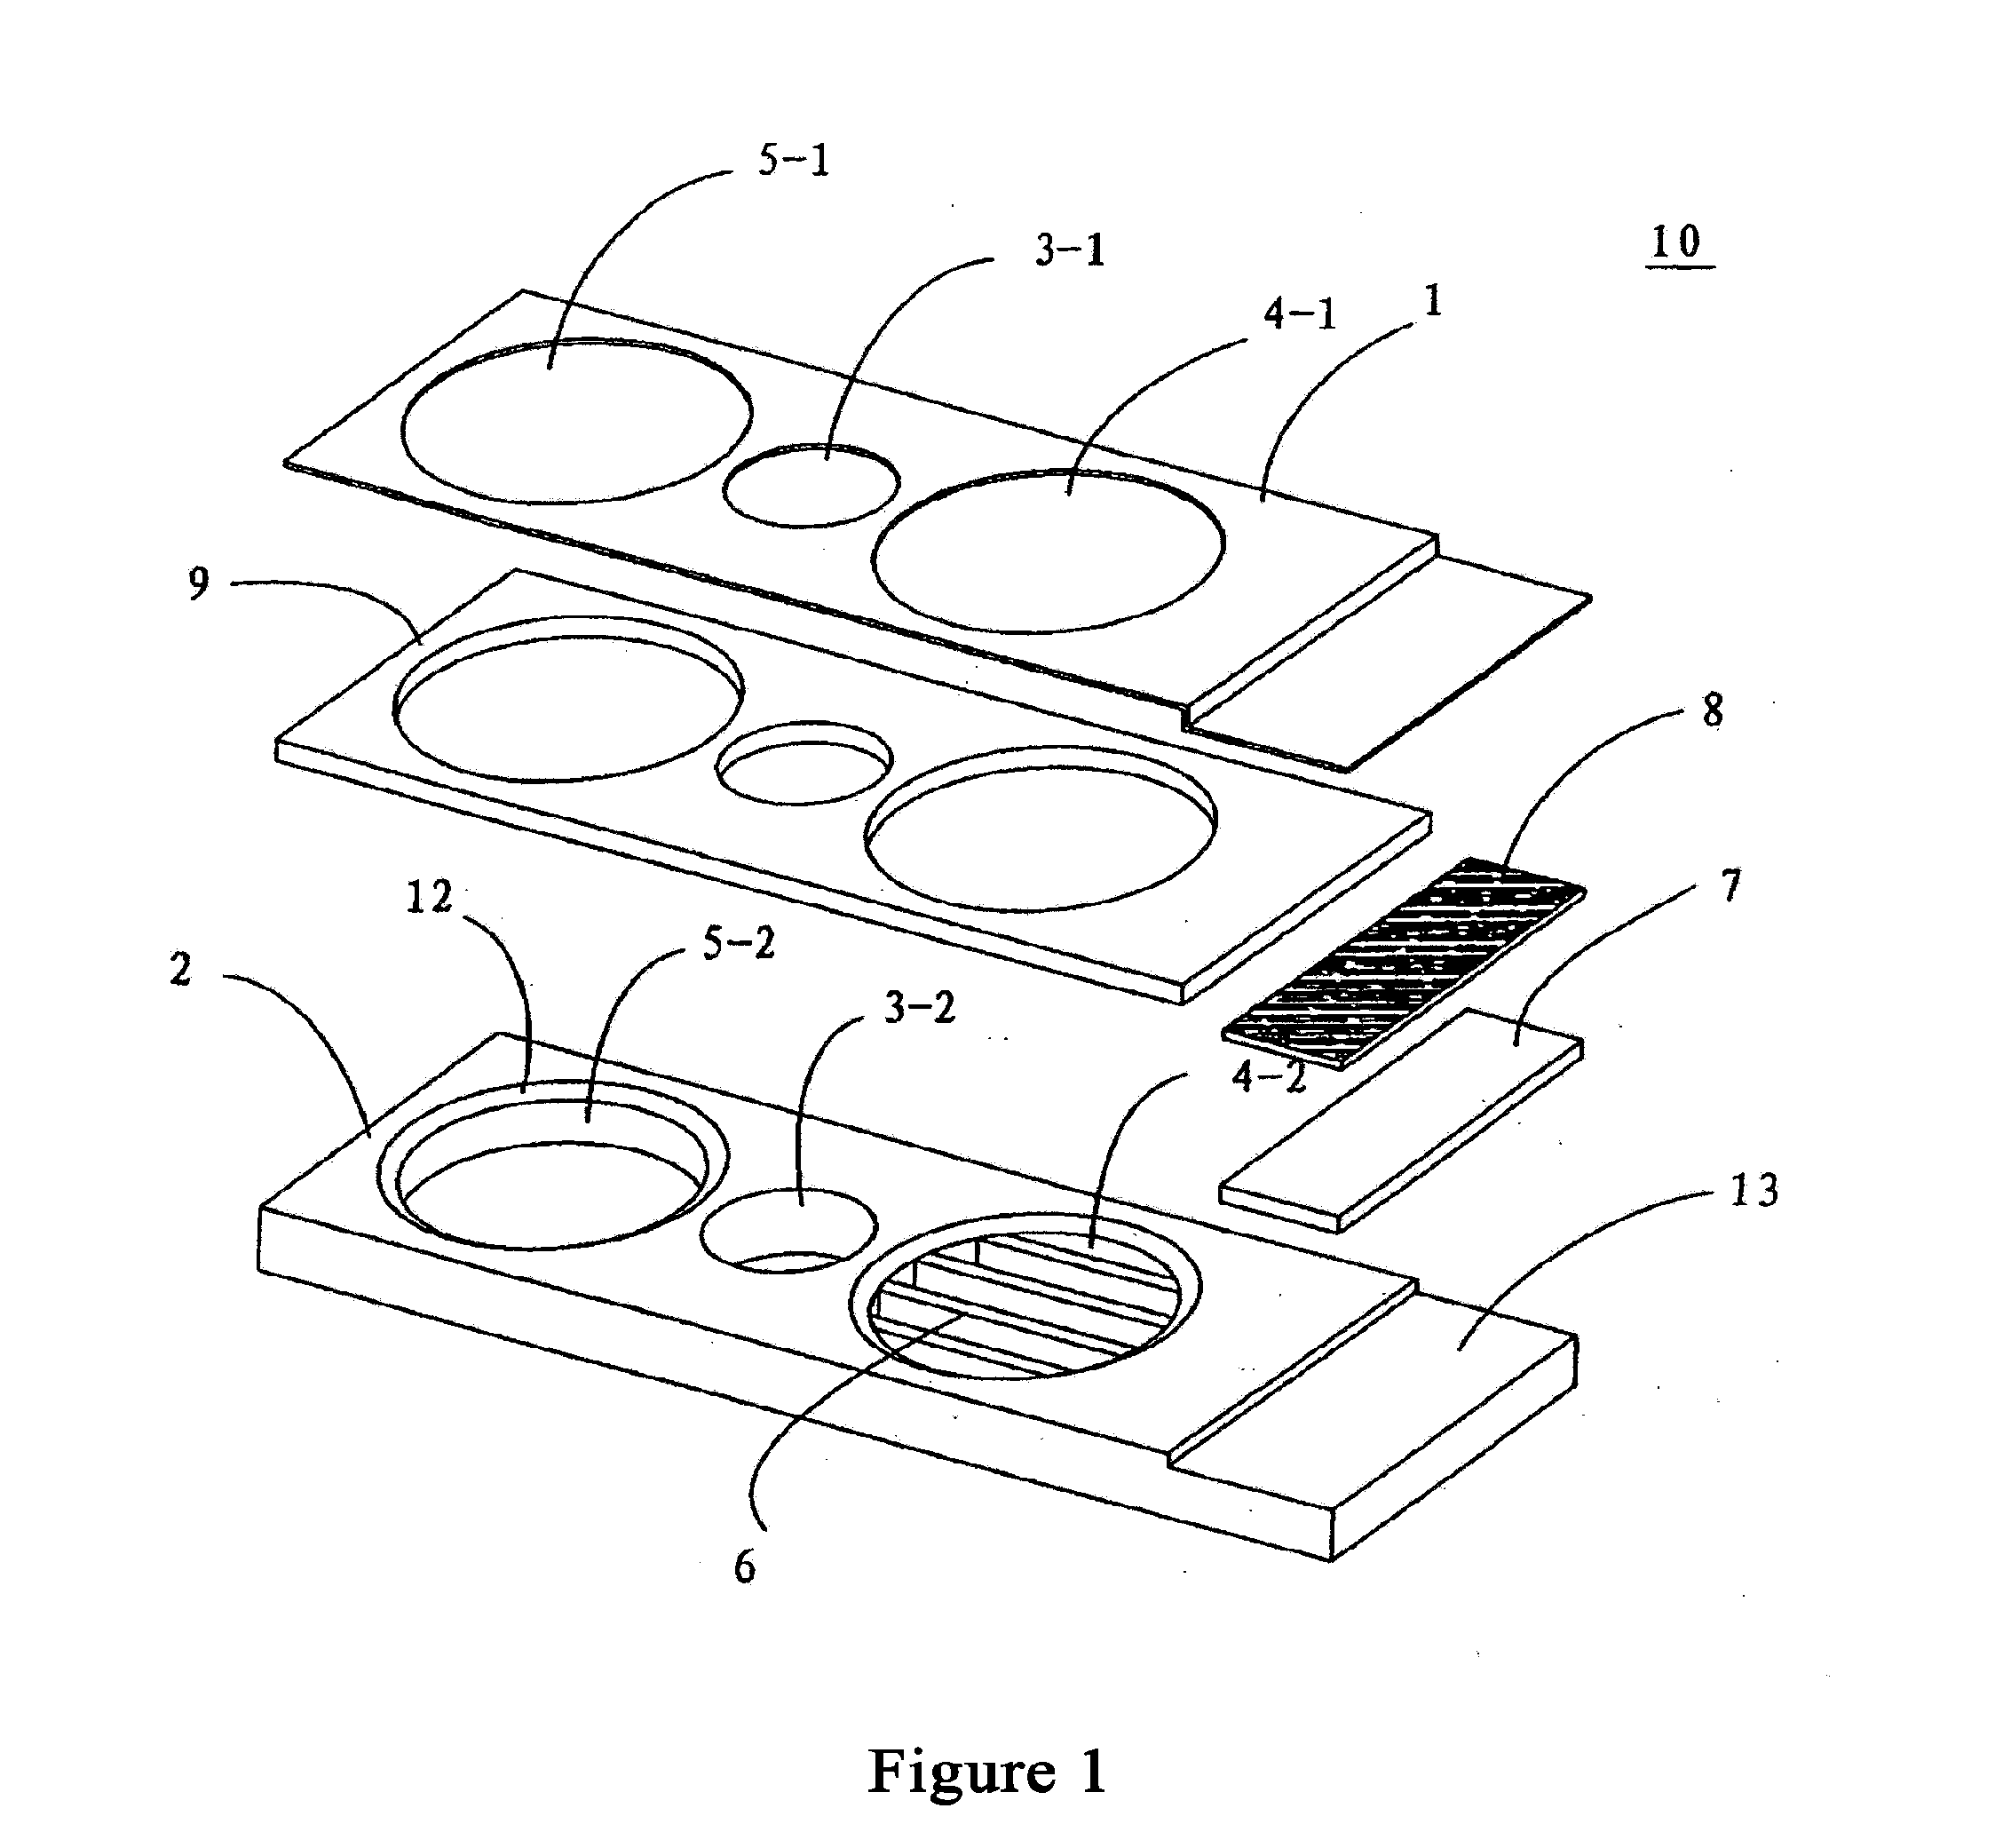 Cooling module for laser, fabricating method thereof, and semiconductor laser fabricated from the module